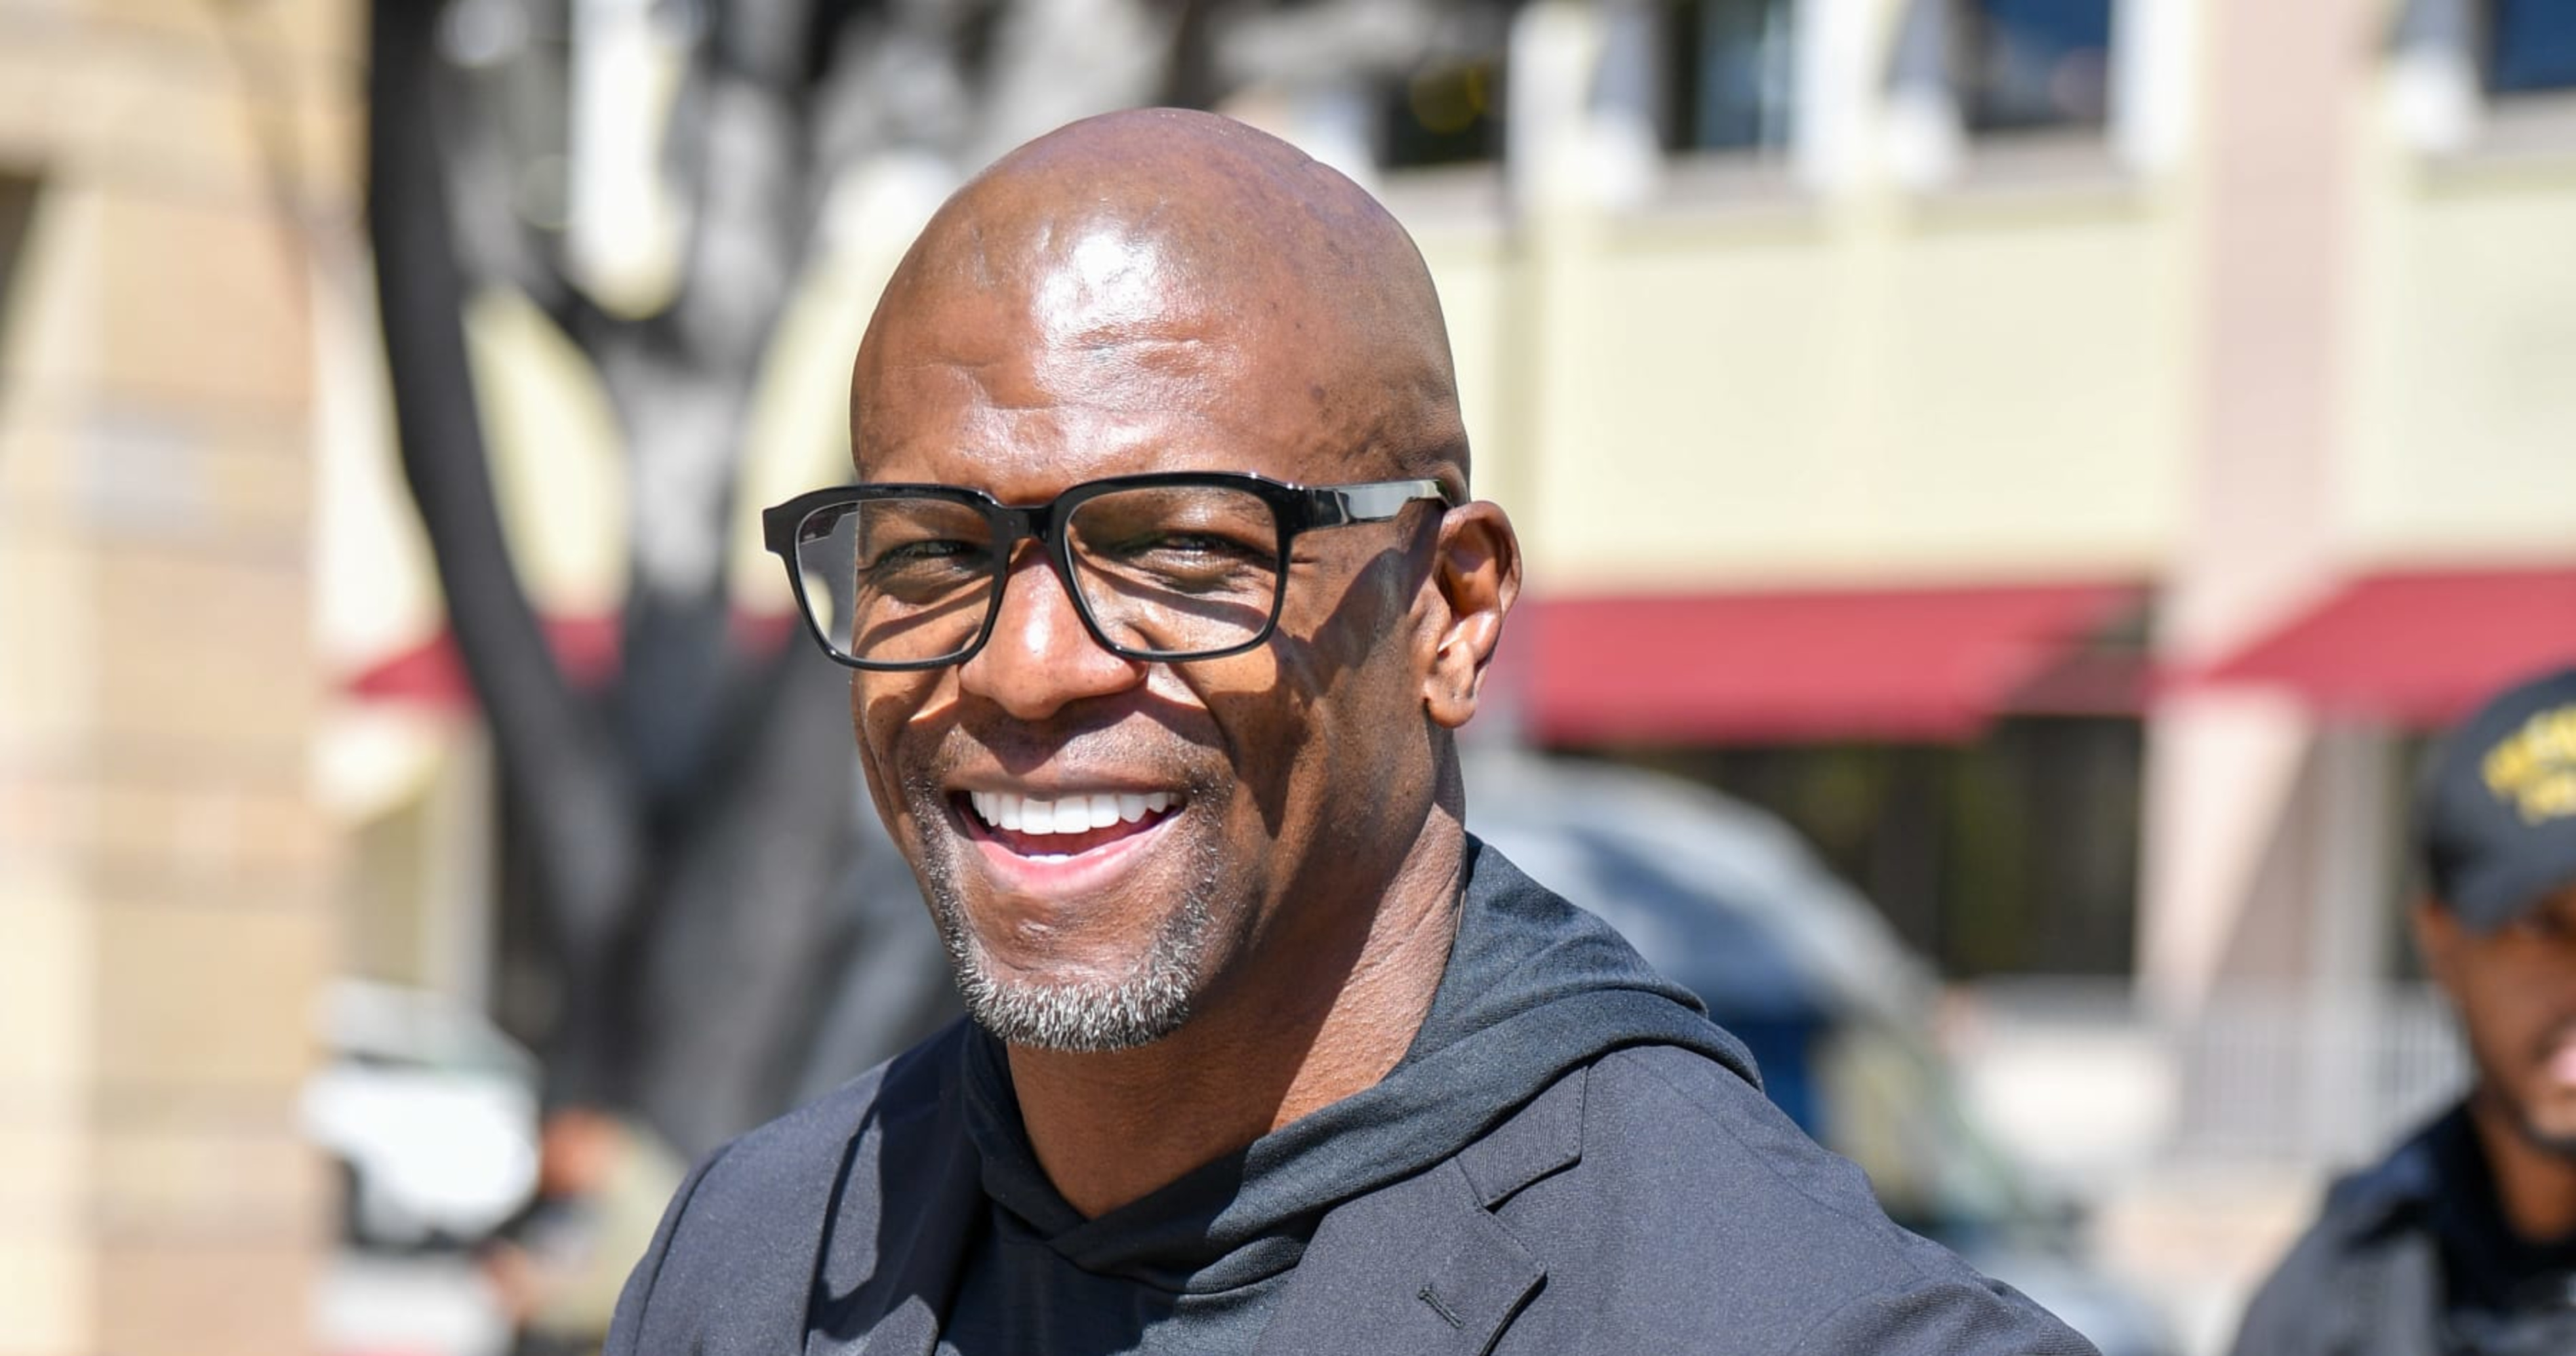 Terry Crews Denies Anderson Silva Boxing Fight Following Speculation After Video